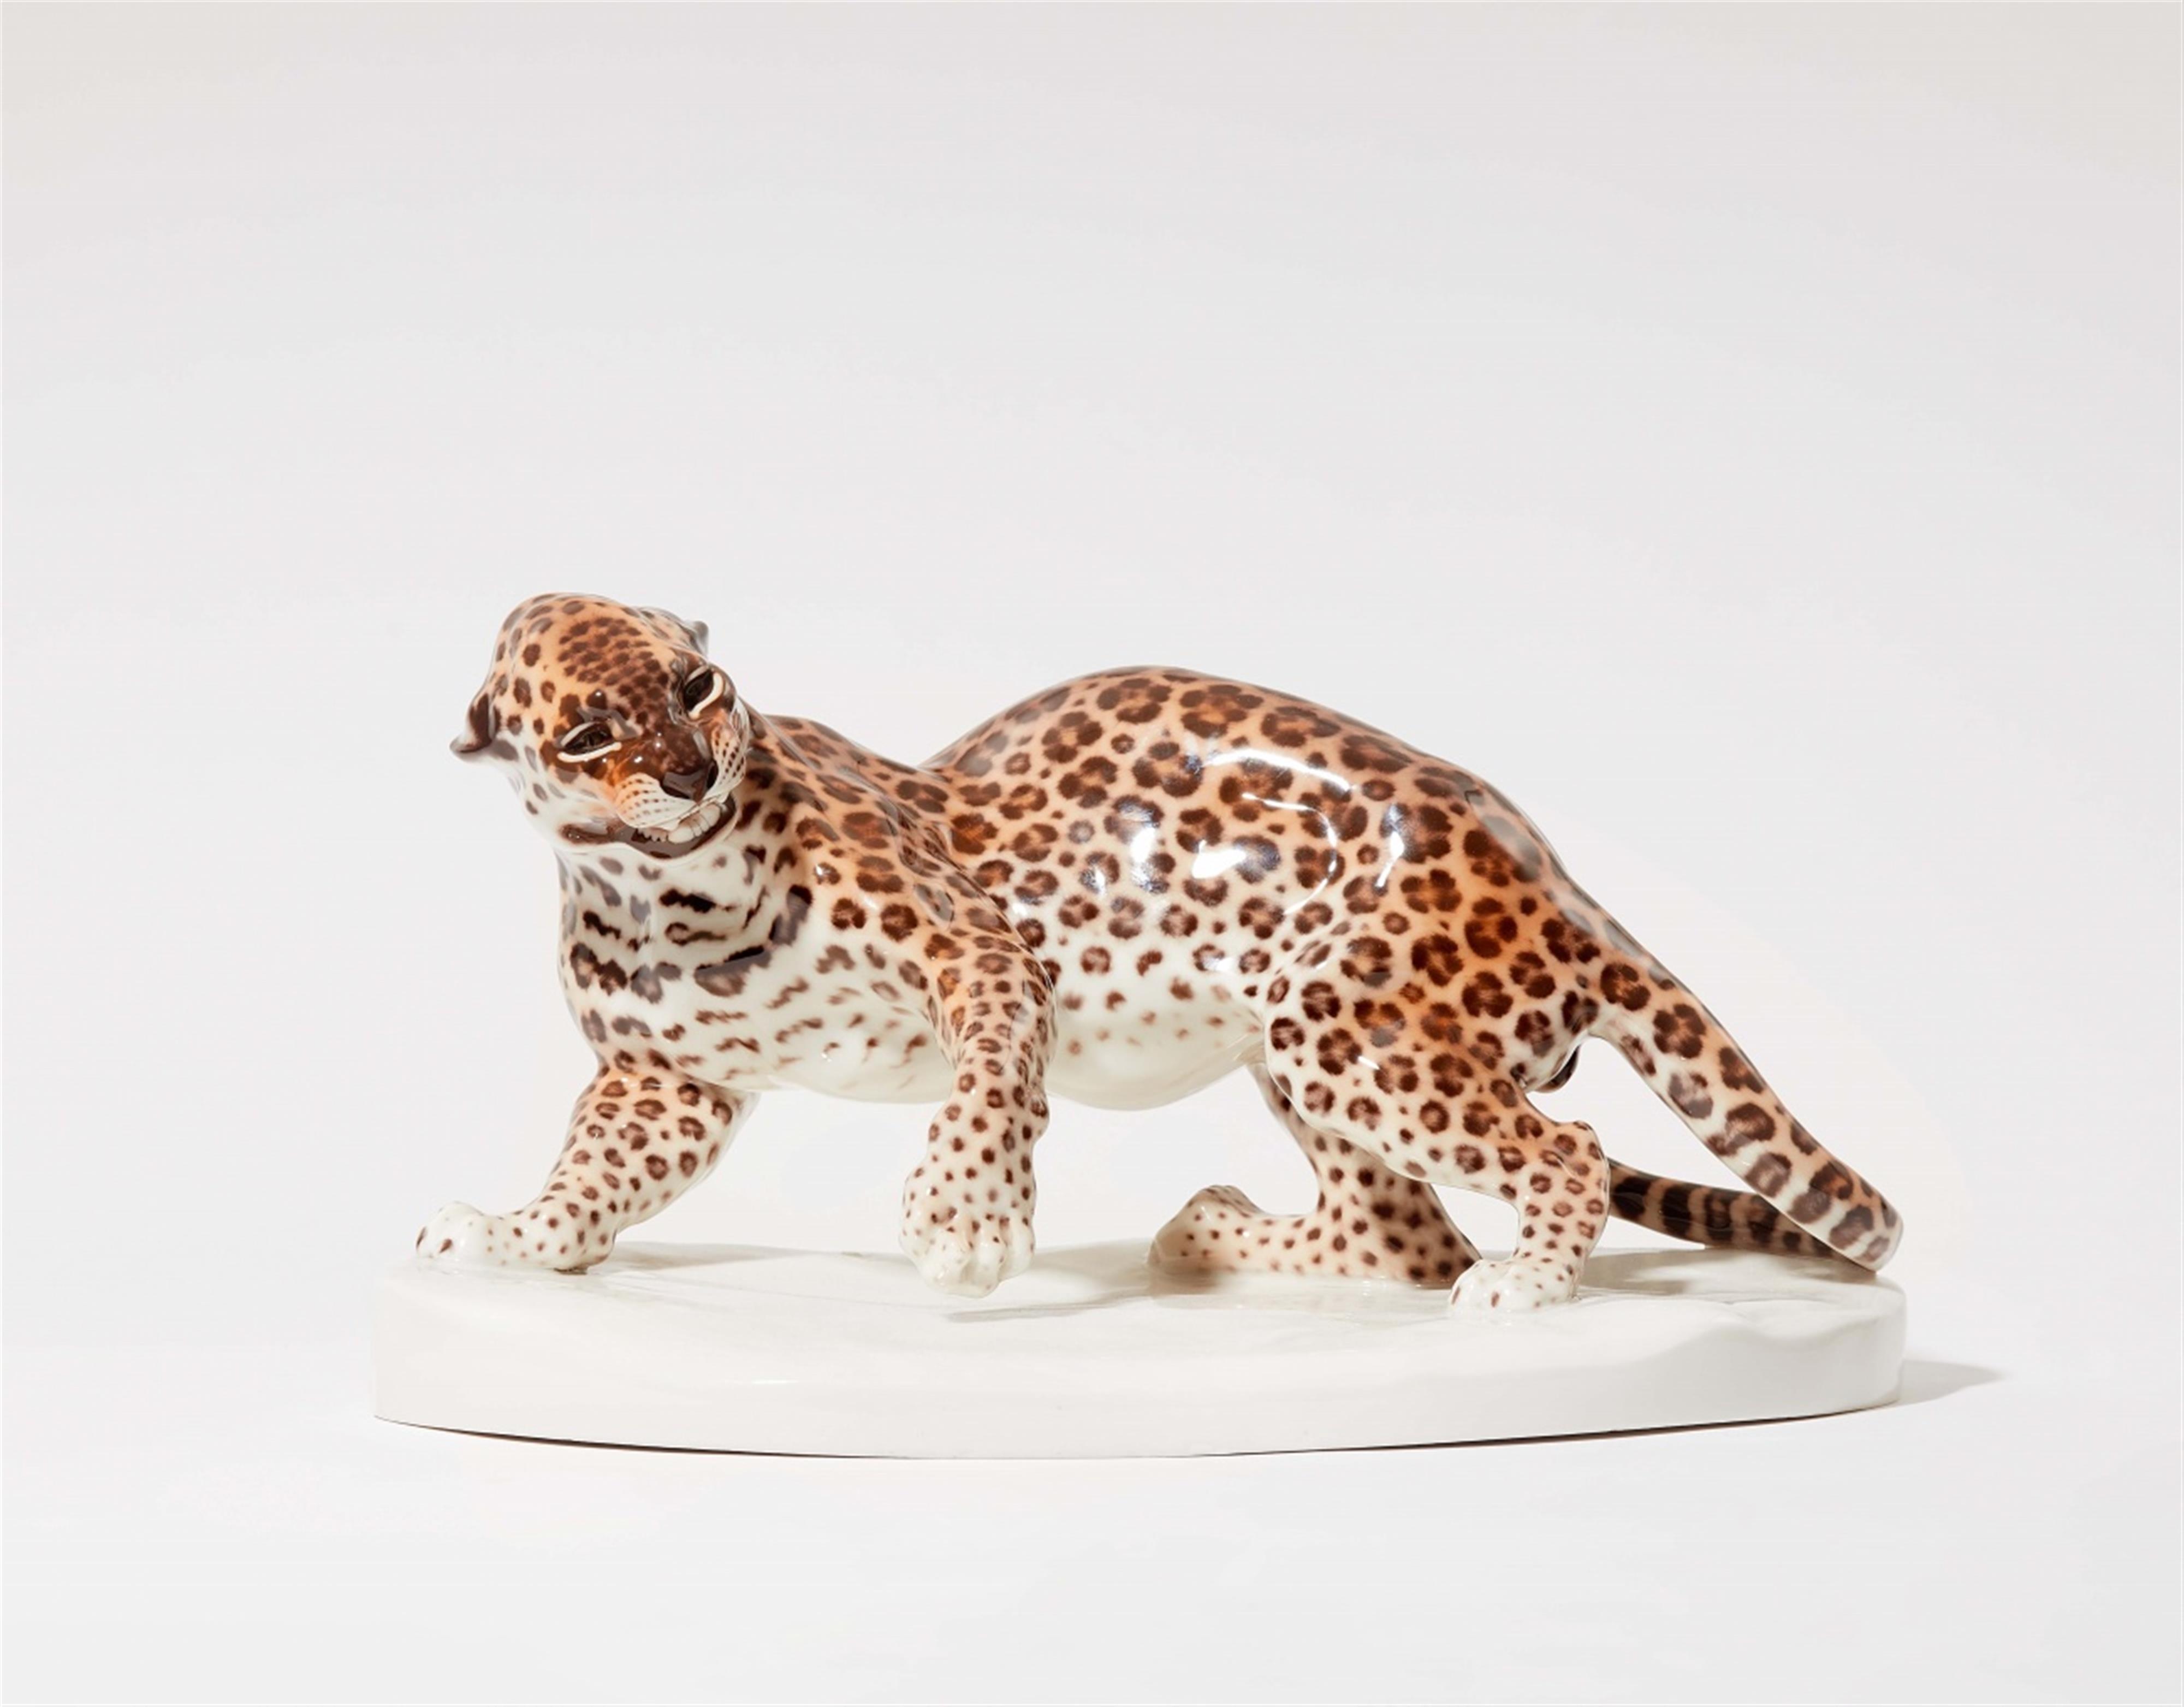 A Nymphenburg porcelain model of a panther - 